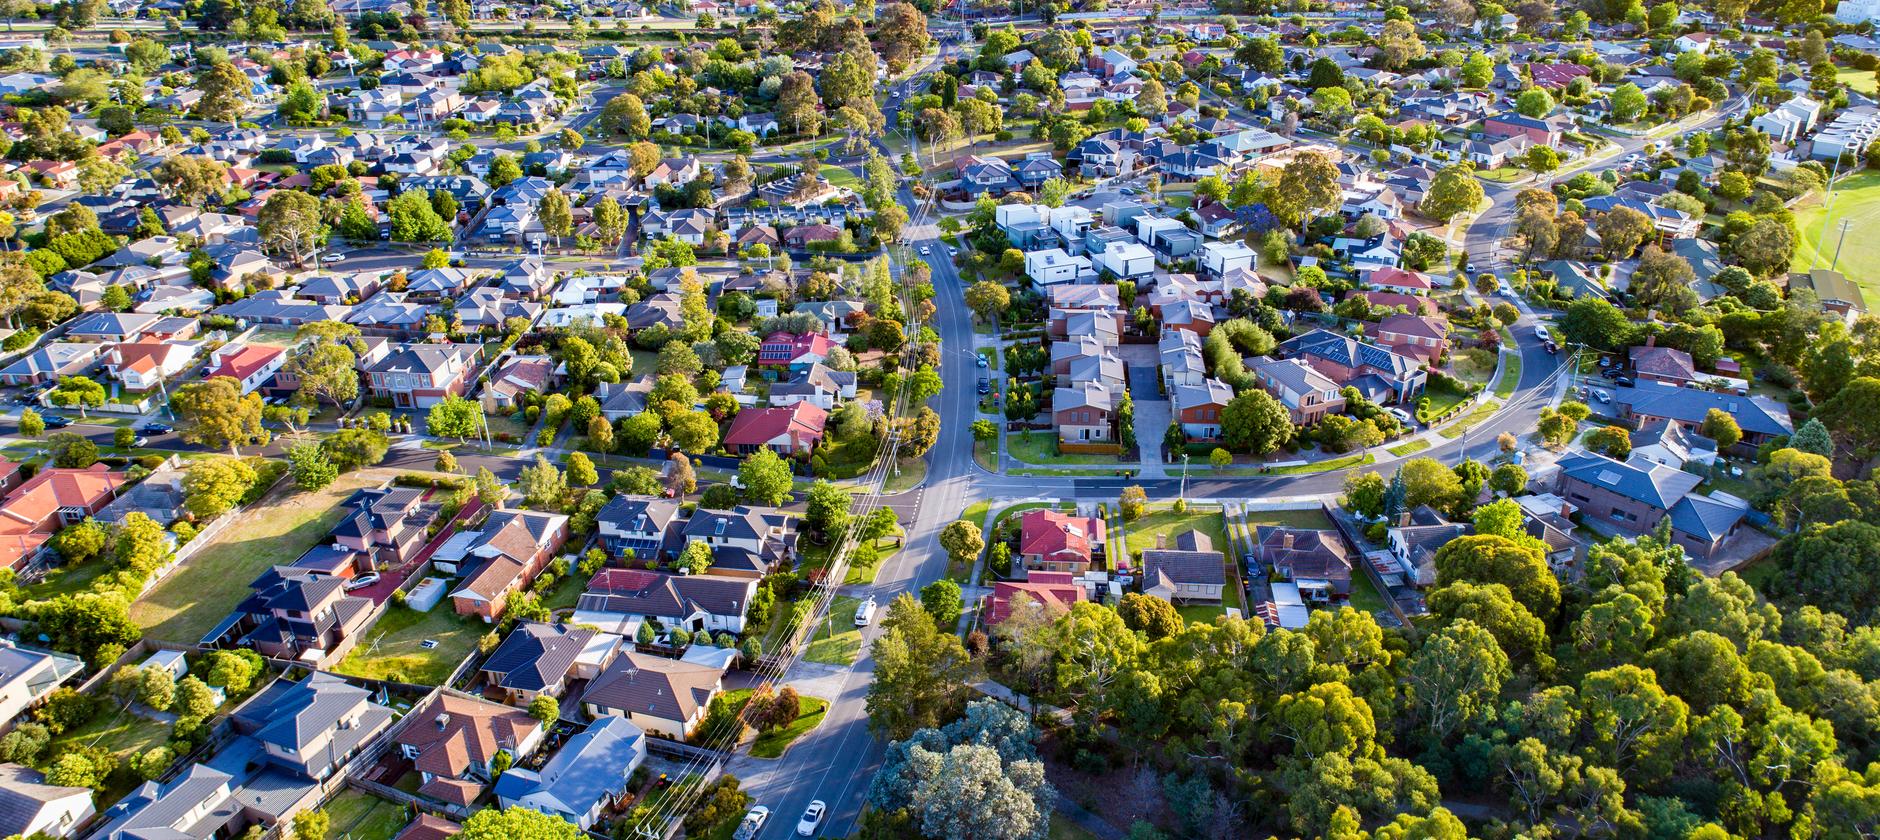 Untapped granny flat potential in largest capitals could boost housing supply